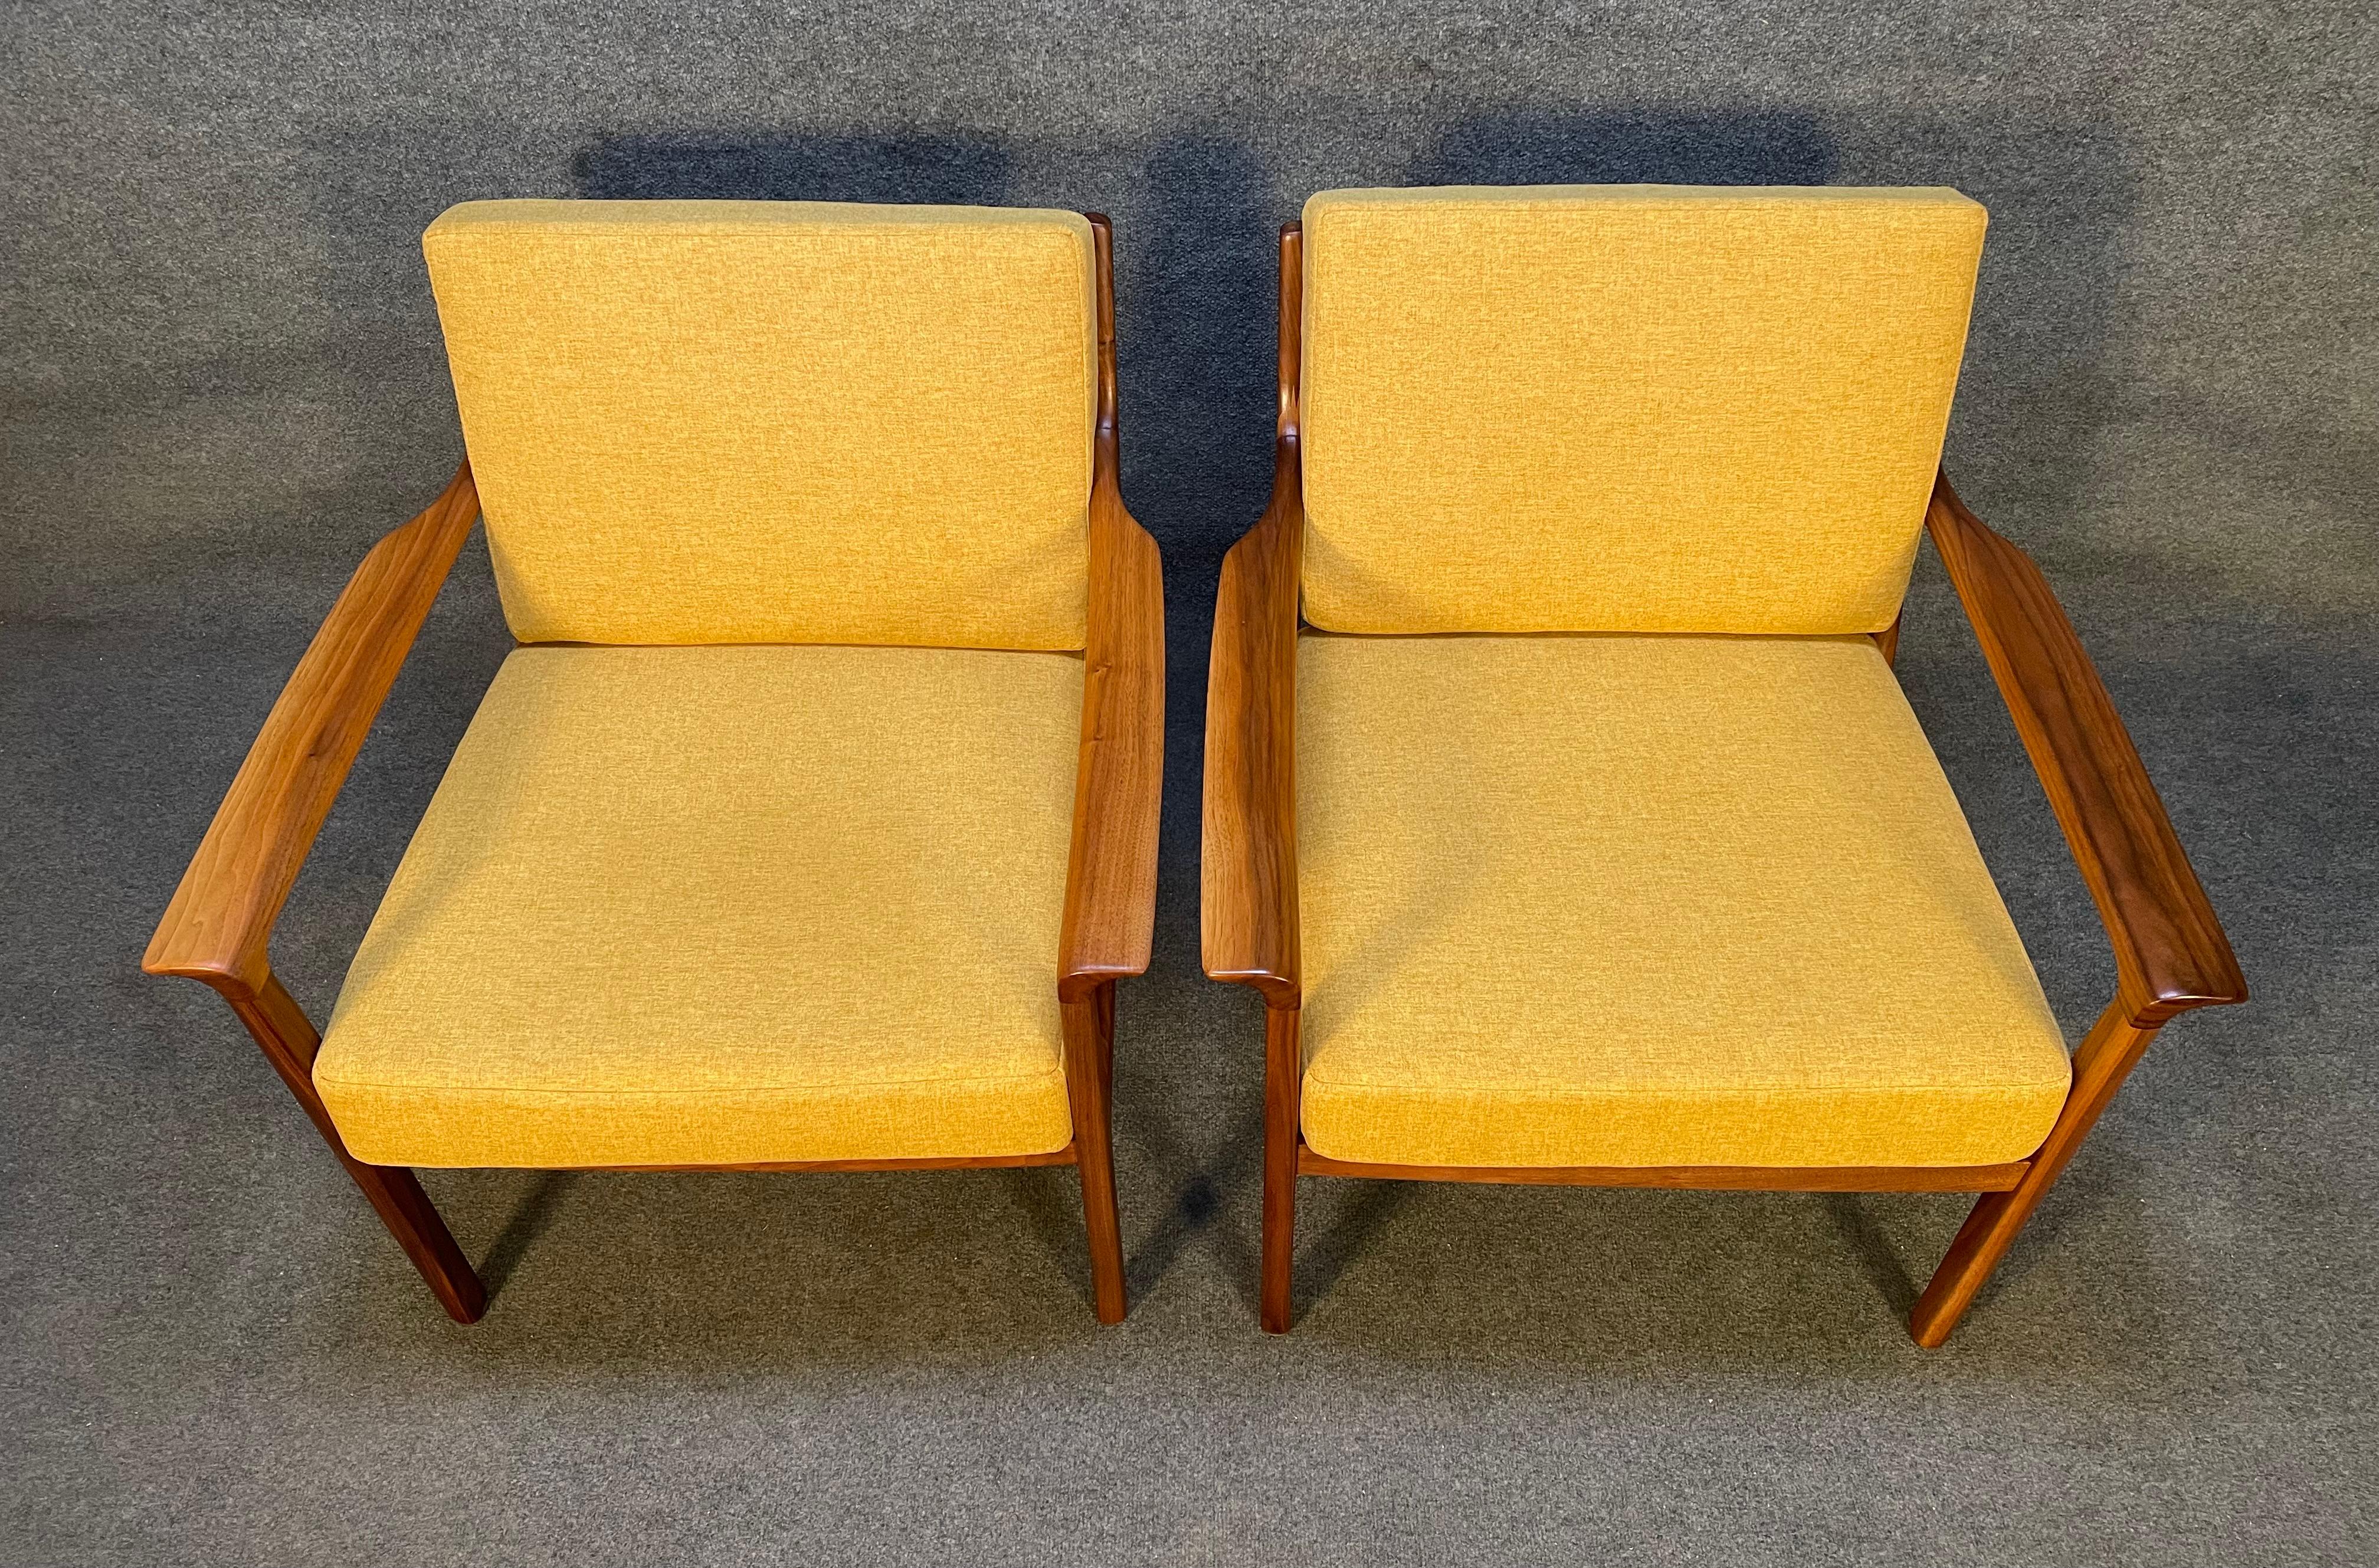 Here is a rare set of two vintage Mid-Century Modern lounge chairs Model 935 in walnut designed by Fredrik Kayser and manufactured by Vatne Mobler in Norway in the 1960s.
This comfortable set, recently imported from Europe to California before its